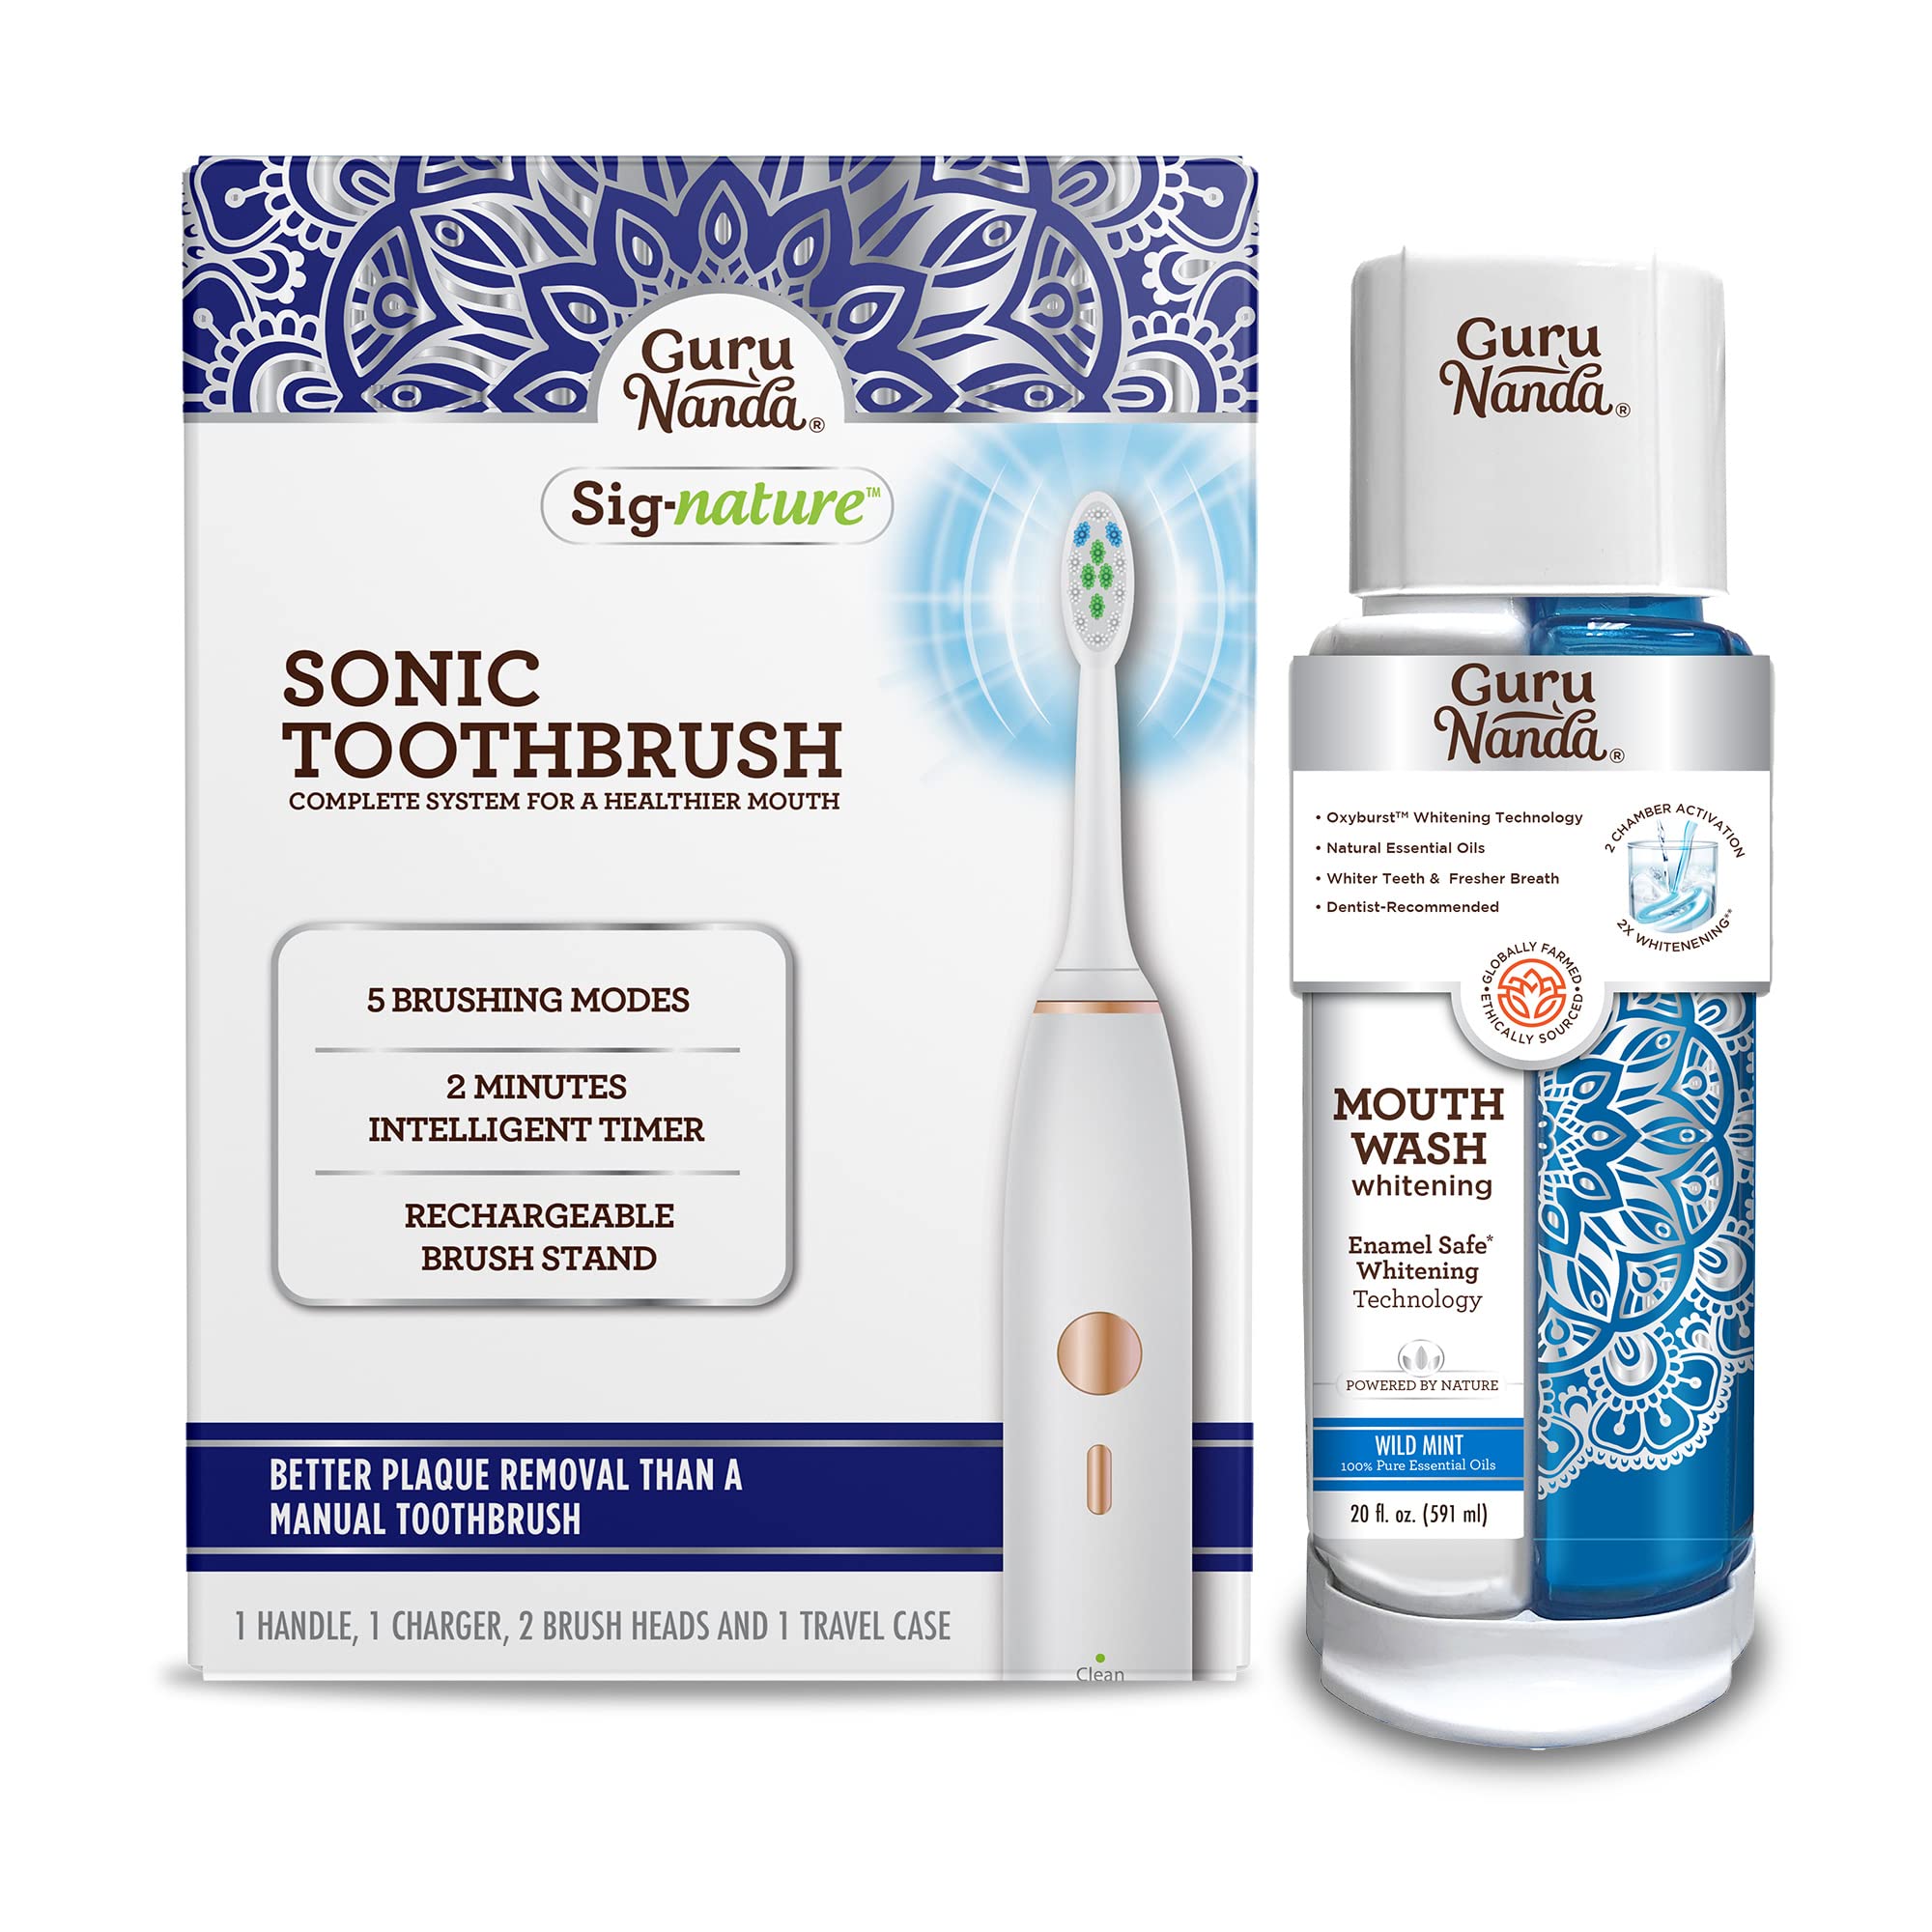 GuruNanda Sonic Toothbrush with 5000 Rechargeable Electric Power, 2 Brush Heads & 1 Travel Case - Dual Barrel Oxyburst Whitening Mouthwash with Natural Essential Oils - Whiter Teeth & Fresher Breath